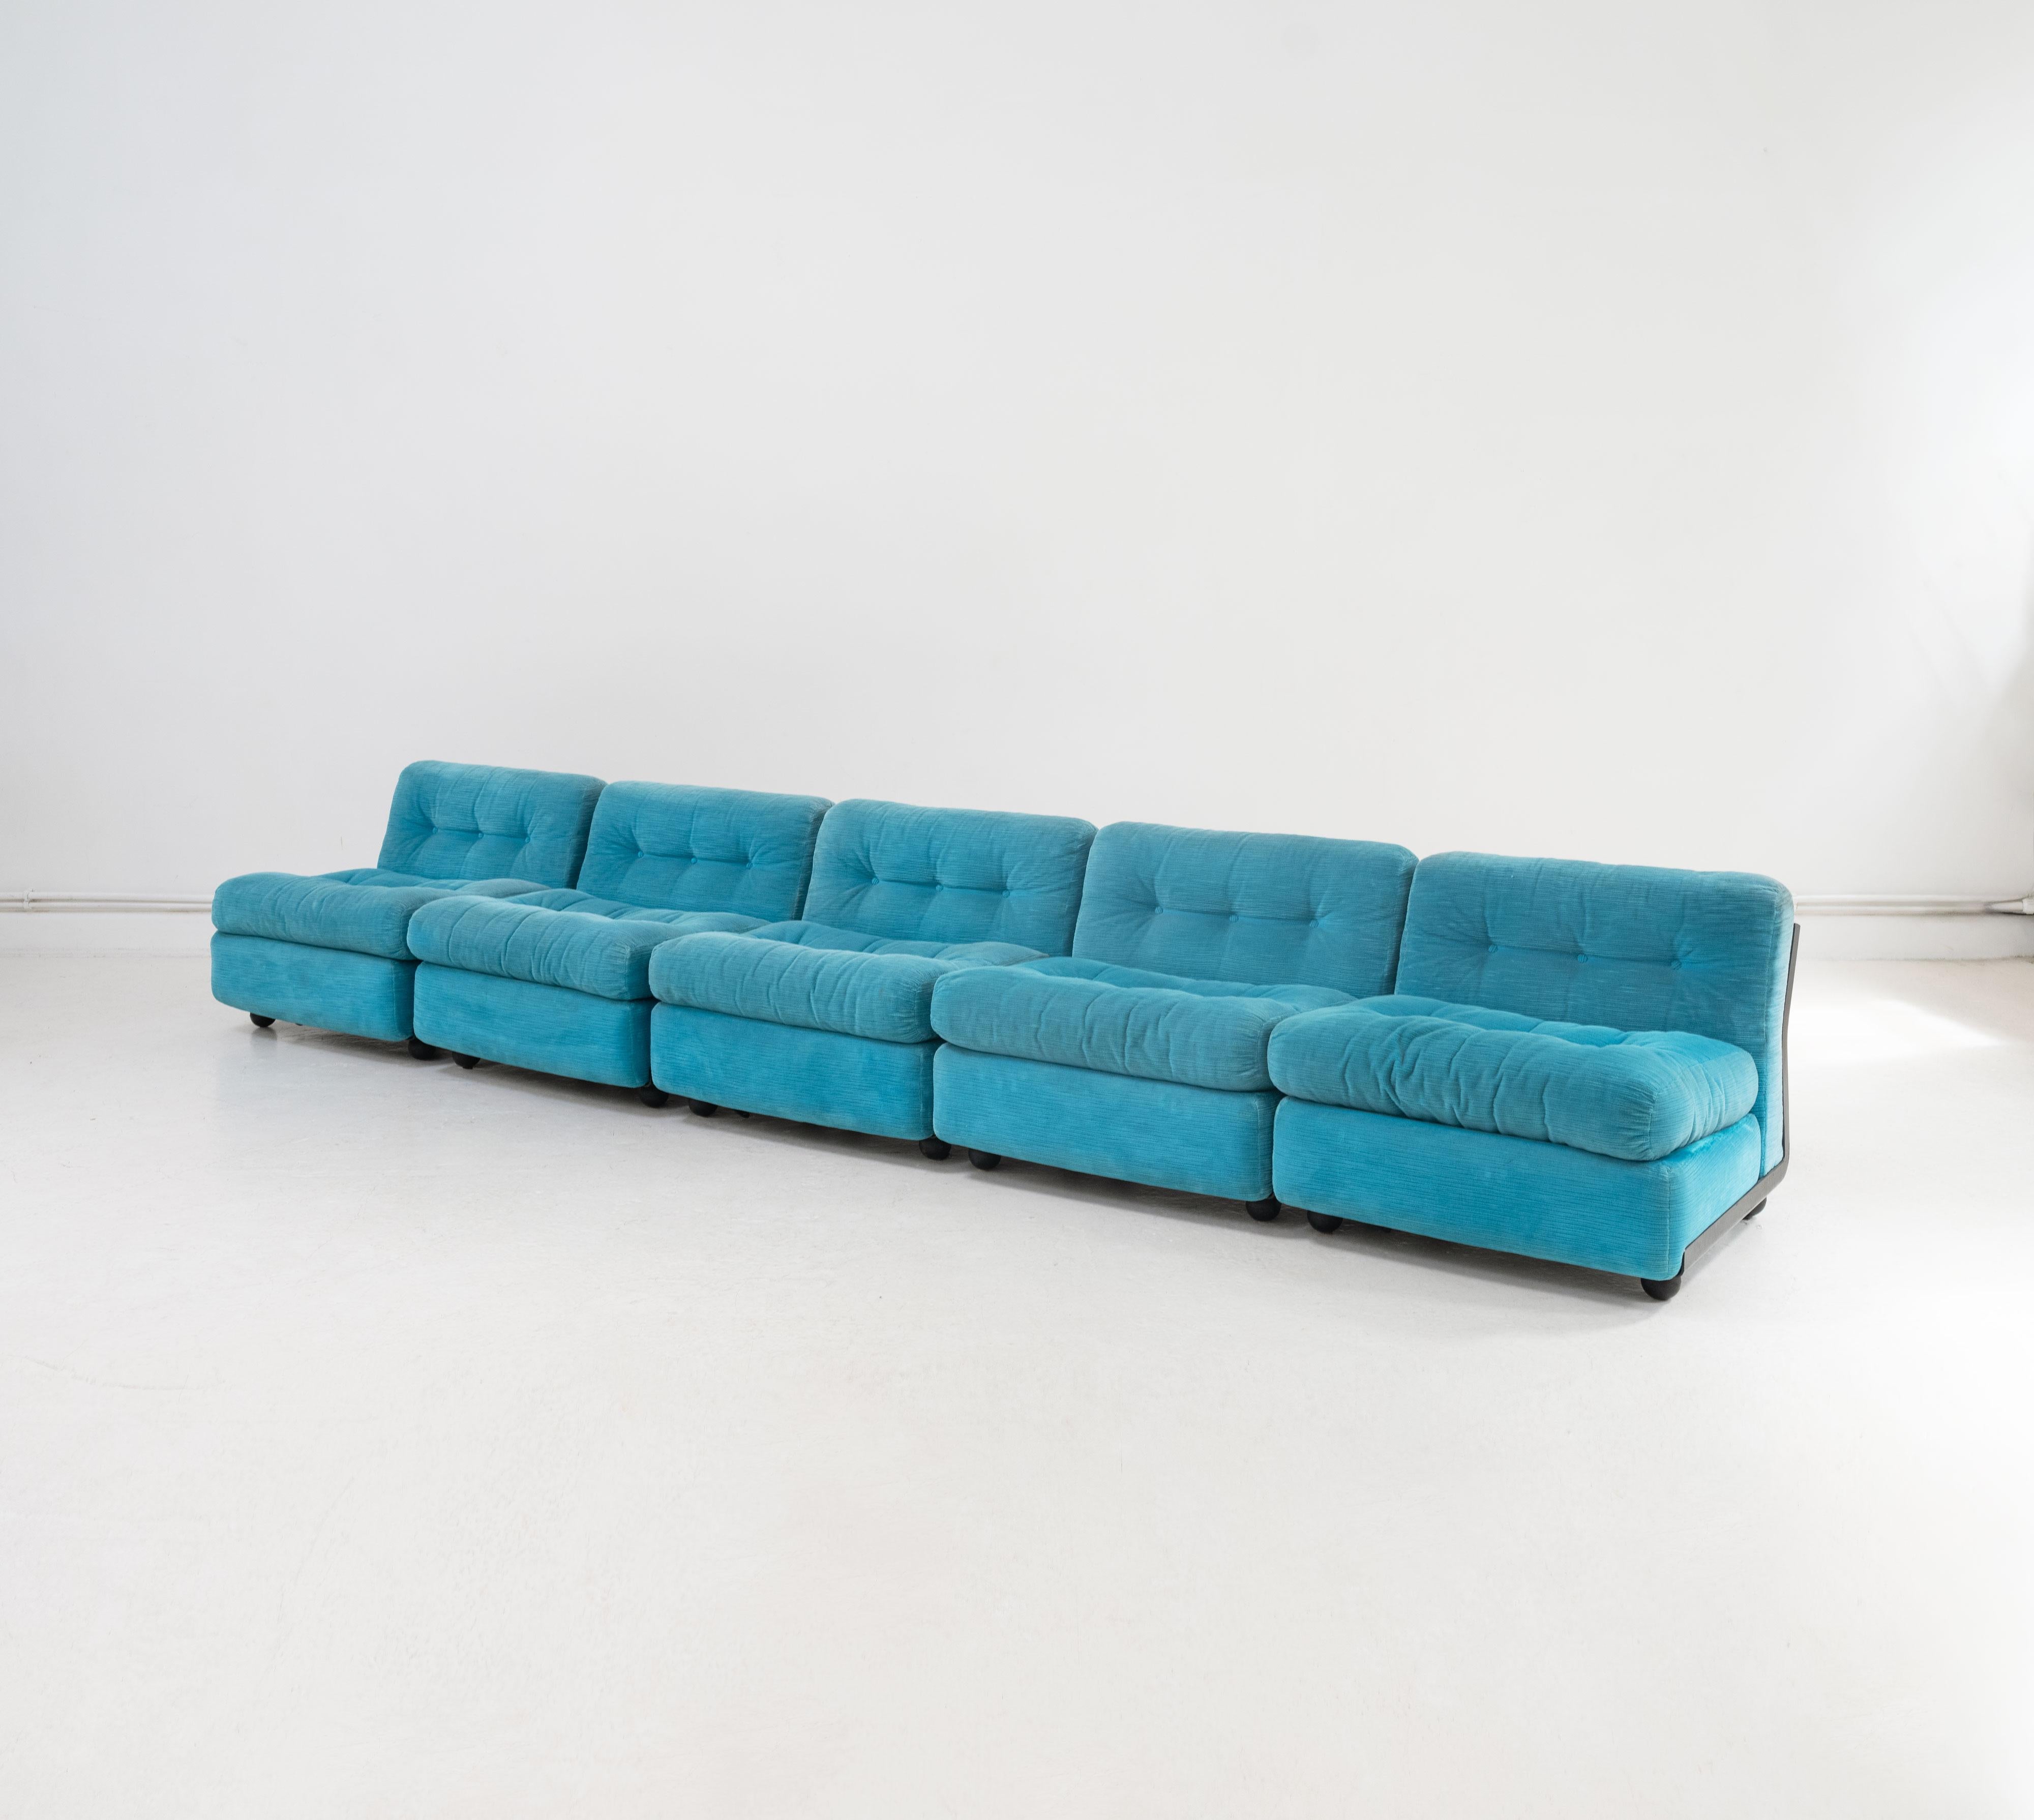 A 5 piece 'Amanta' sofa designed by Mario Bellini and manufactured by B&B Italia in the 1980's. Each module is composed from a black enamelled fibrelite shell with rubber feet upon which seat 3 upholstered cushions in an aquamarine corduroy. The